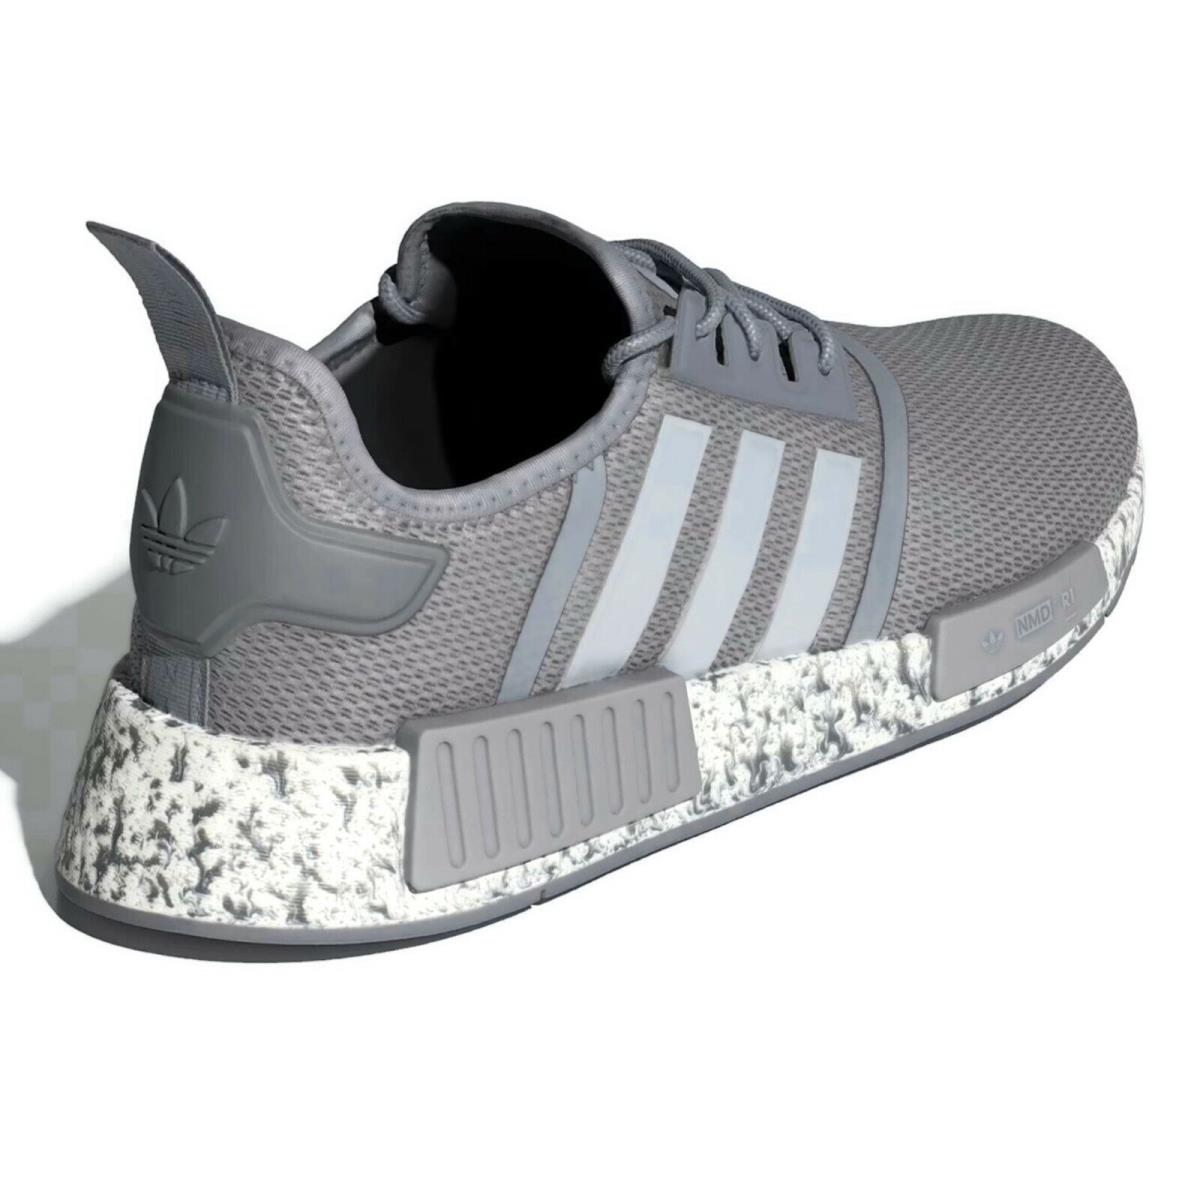 Adidas Originals Nmd R1 Shoes Men`s Sneakers Running Casual Shoes Gray White - Gray, Manufacturer: Grey / Light Onix / Cloud White